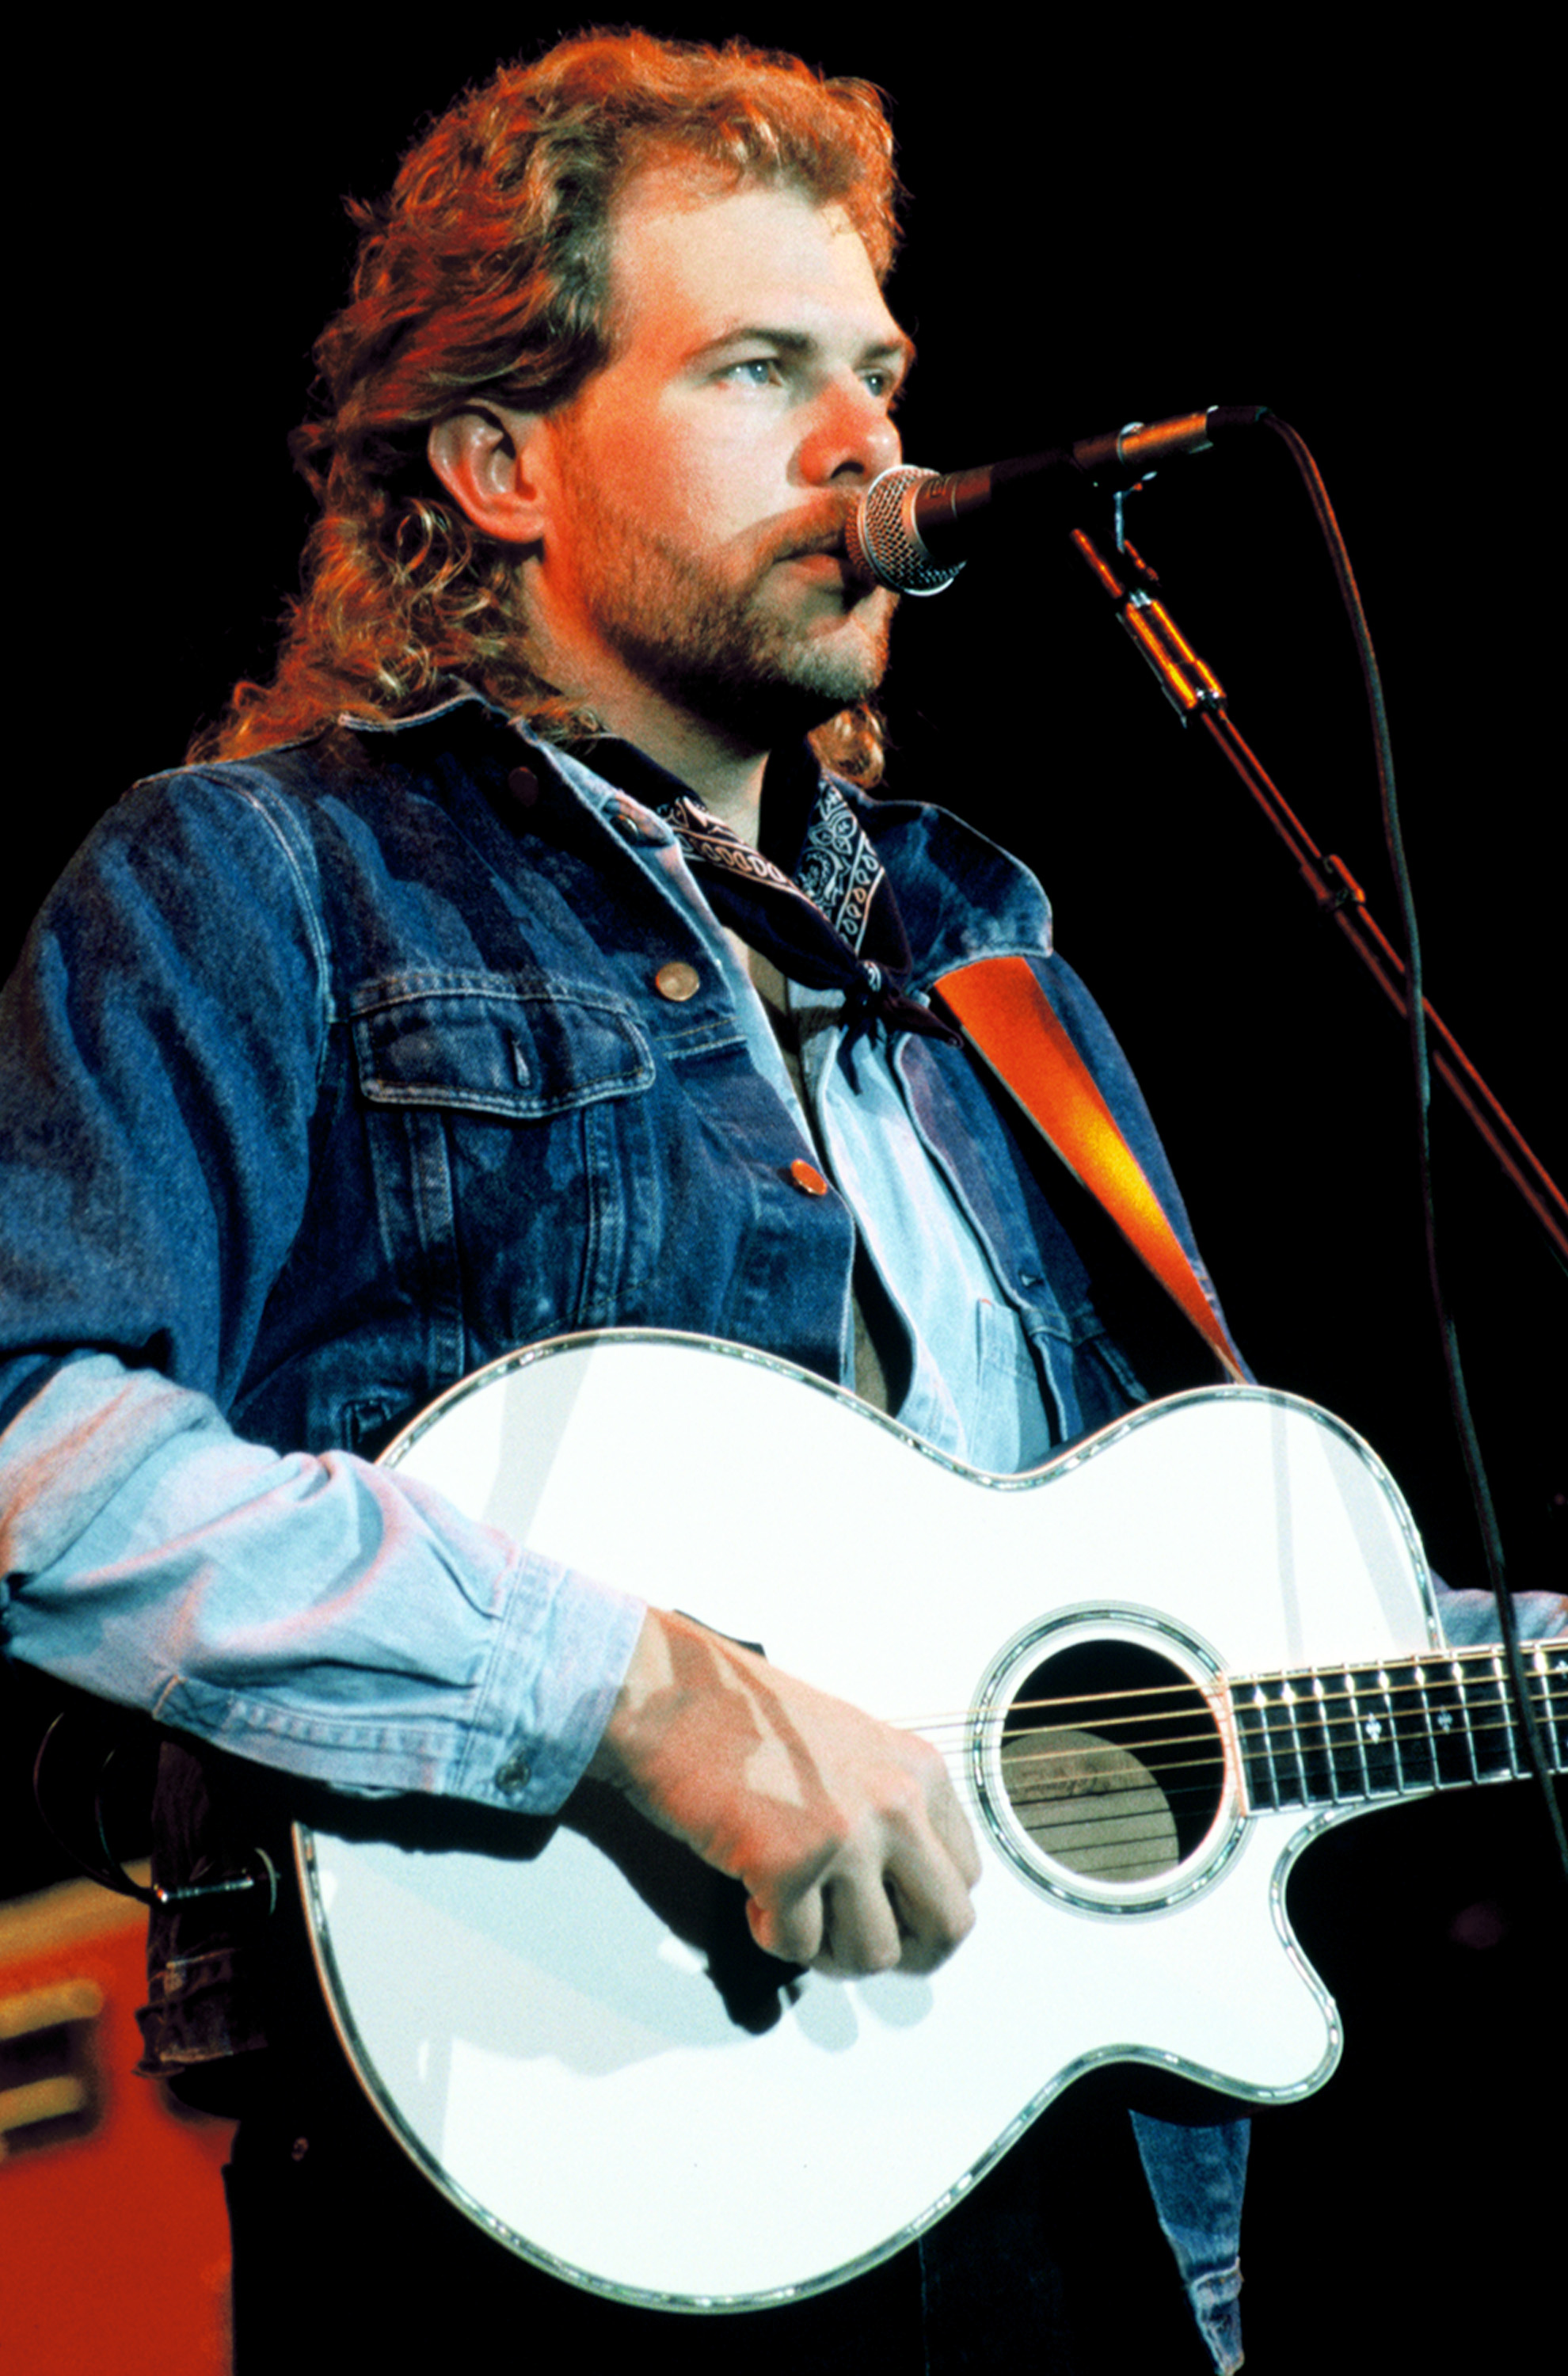 Toby Keith performs in Mountain View, California on October 14, 1993 | Source: Getty Images